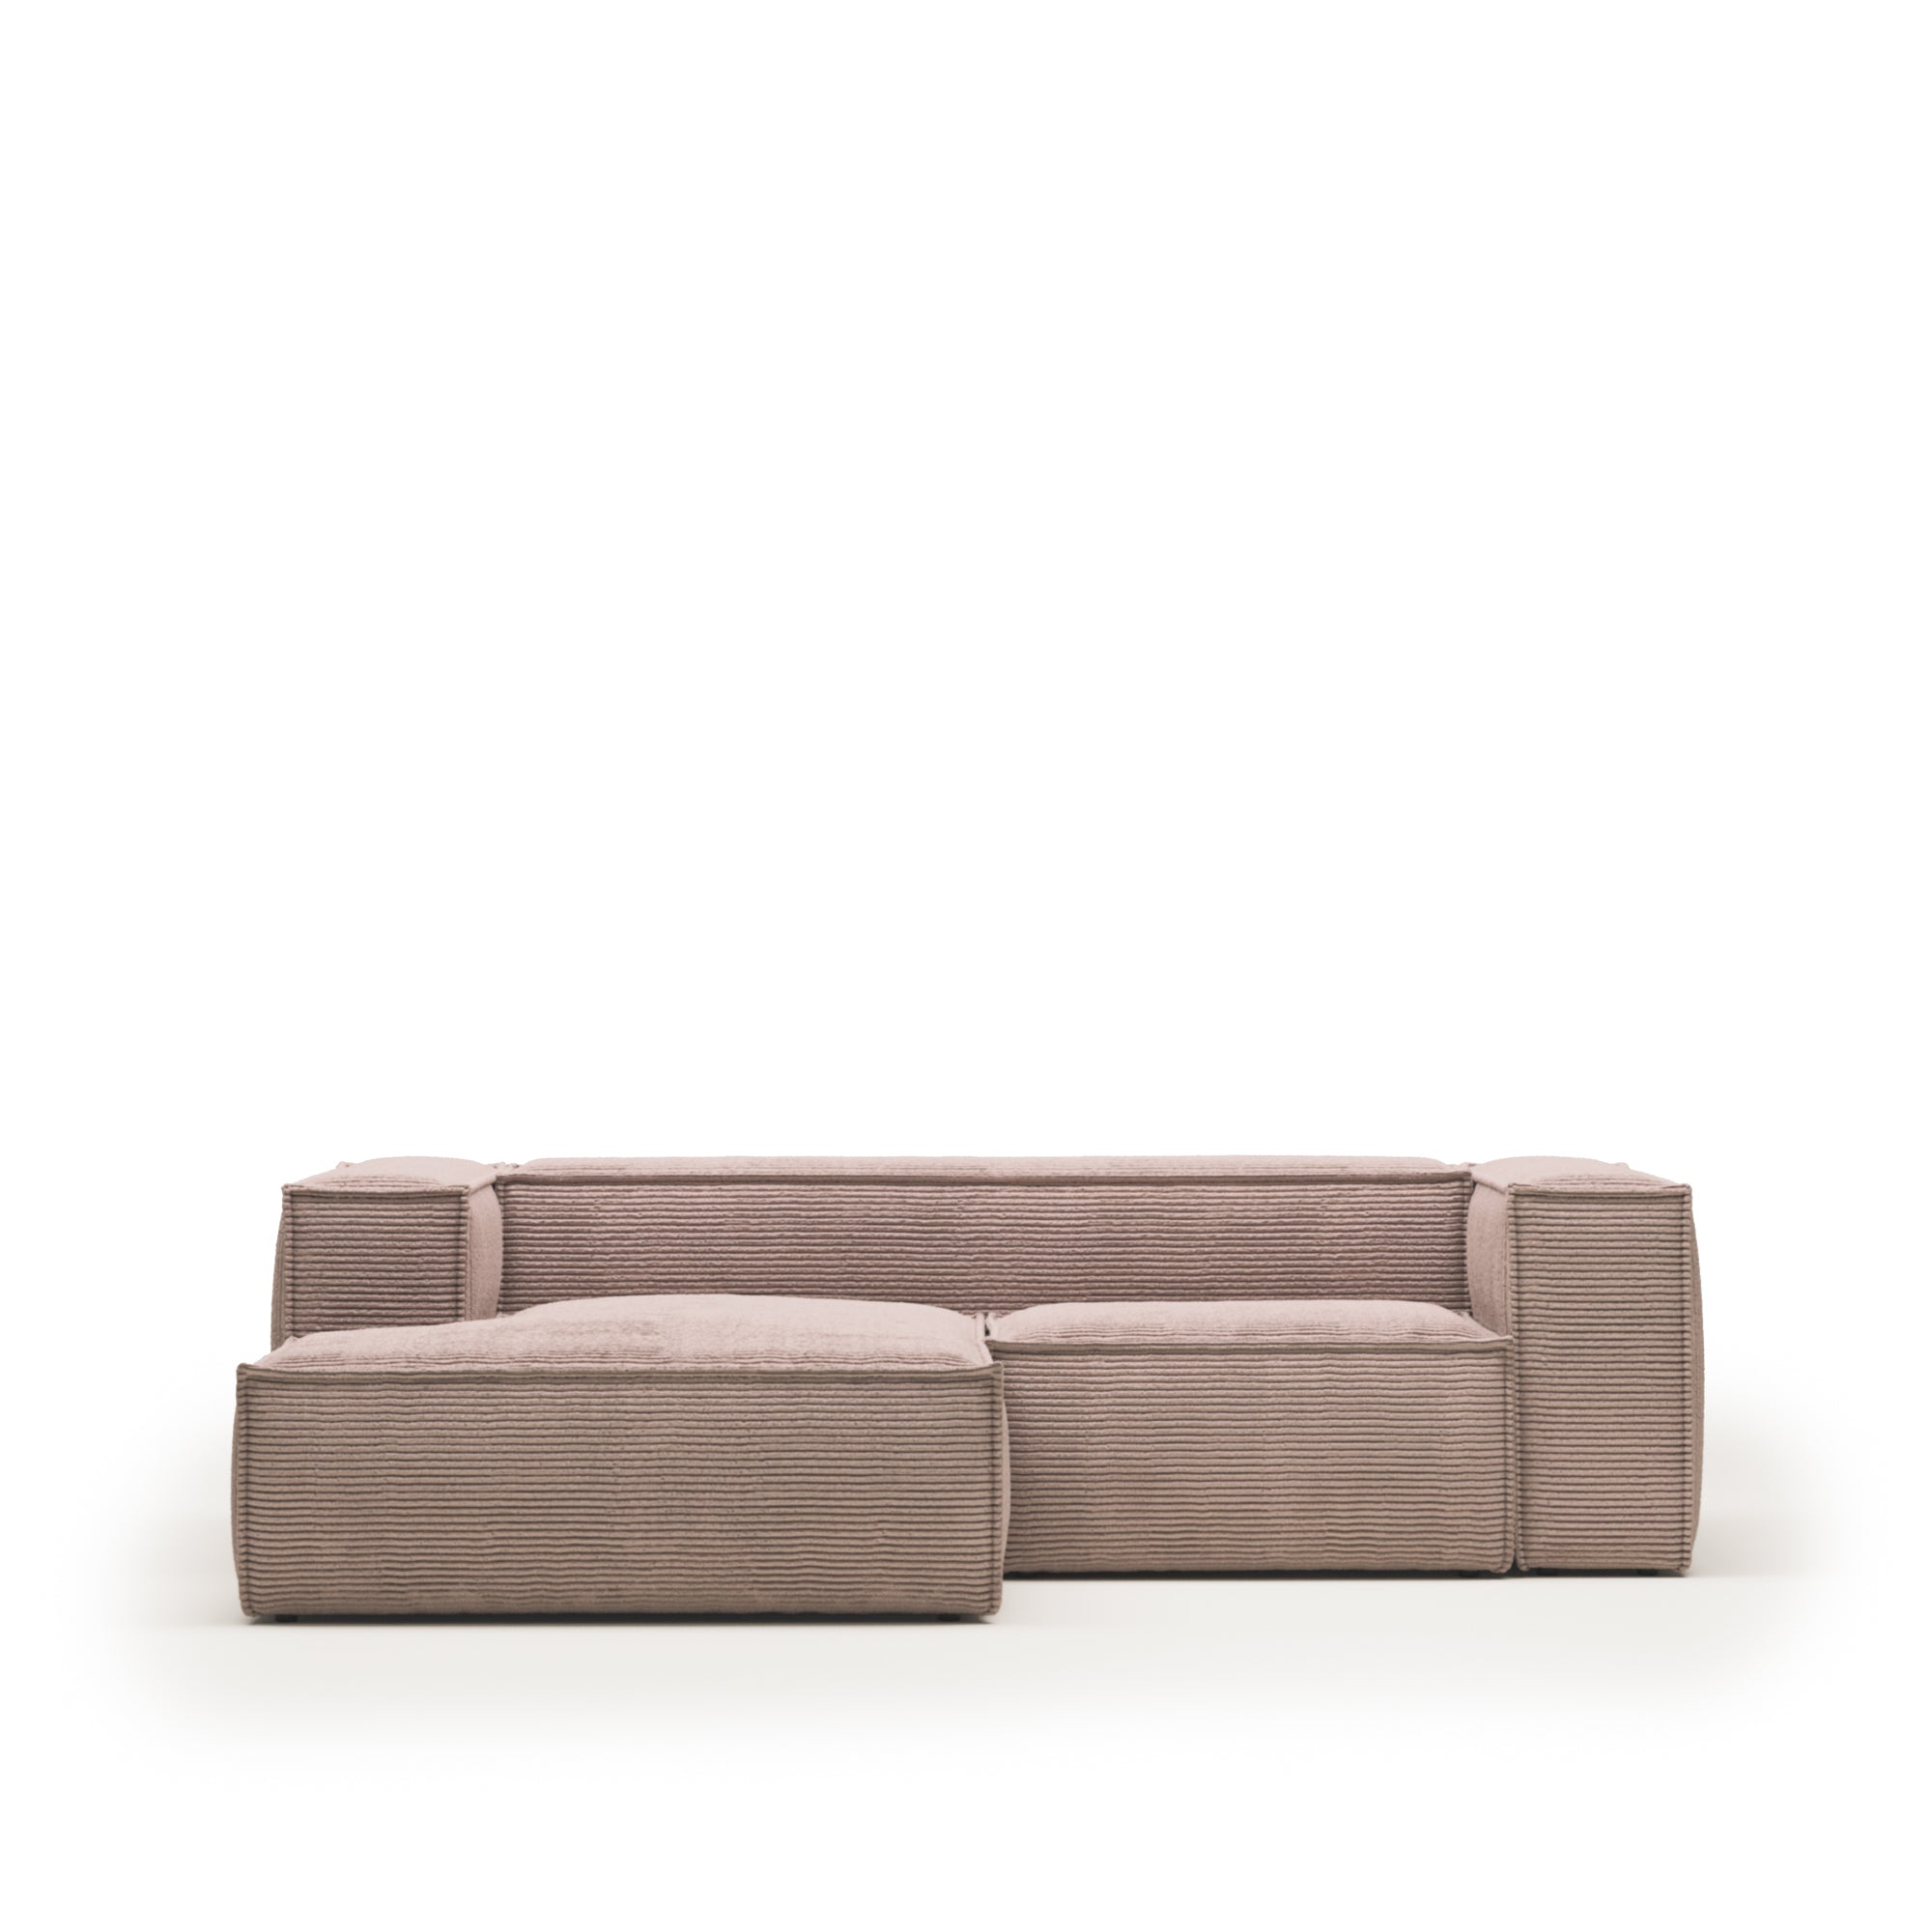 Blok 2 seater sofa with left side chaise longue in pink wide seam corduroy, 240 cm